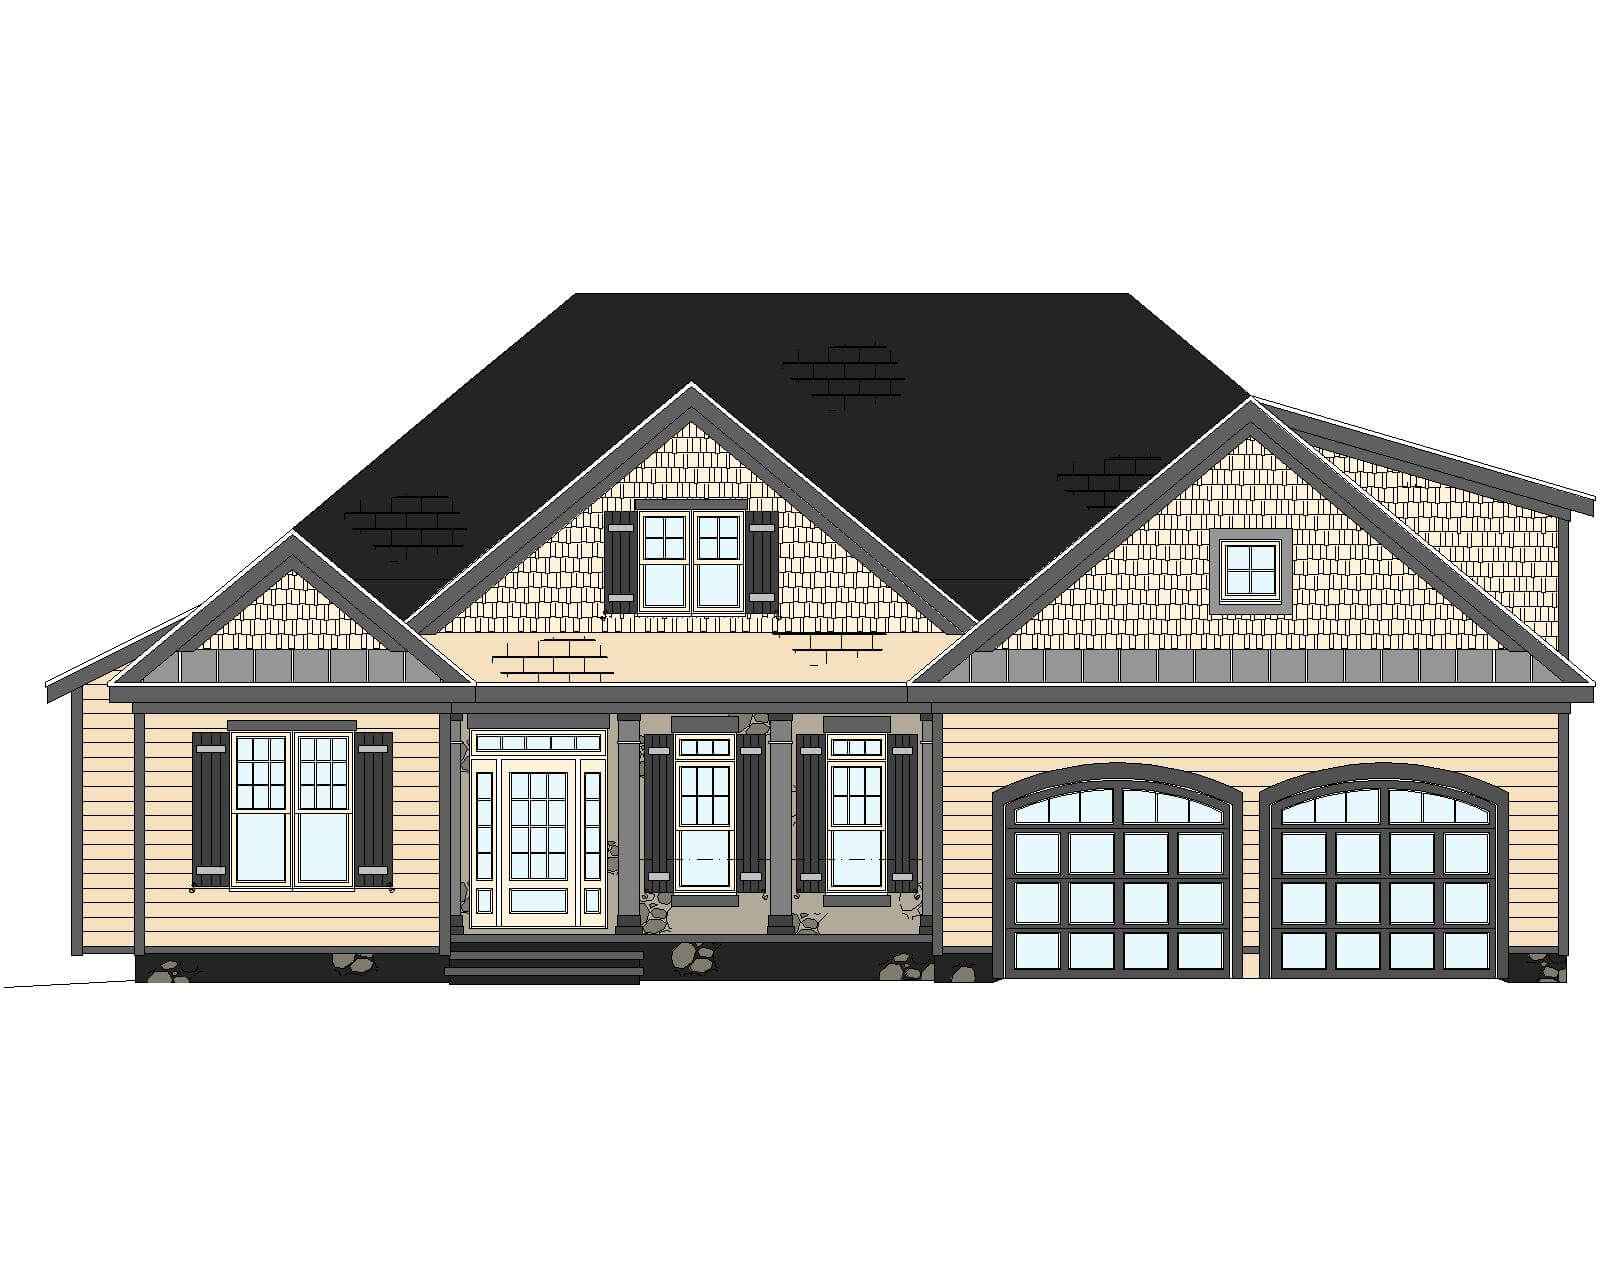 Architectural rendering of a single-story home with a symmetrical design featuring a central entrance flanked by two large windows, a pitched shingle roof, and a two-car garage with arched doors14-1548